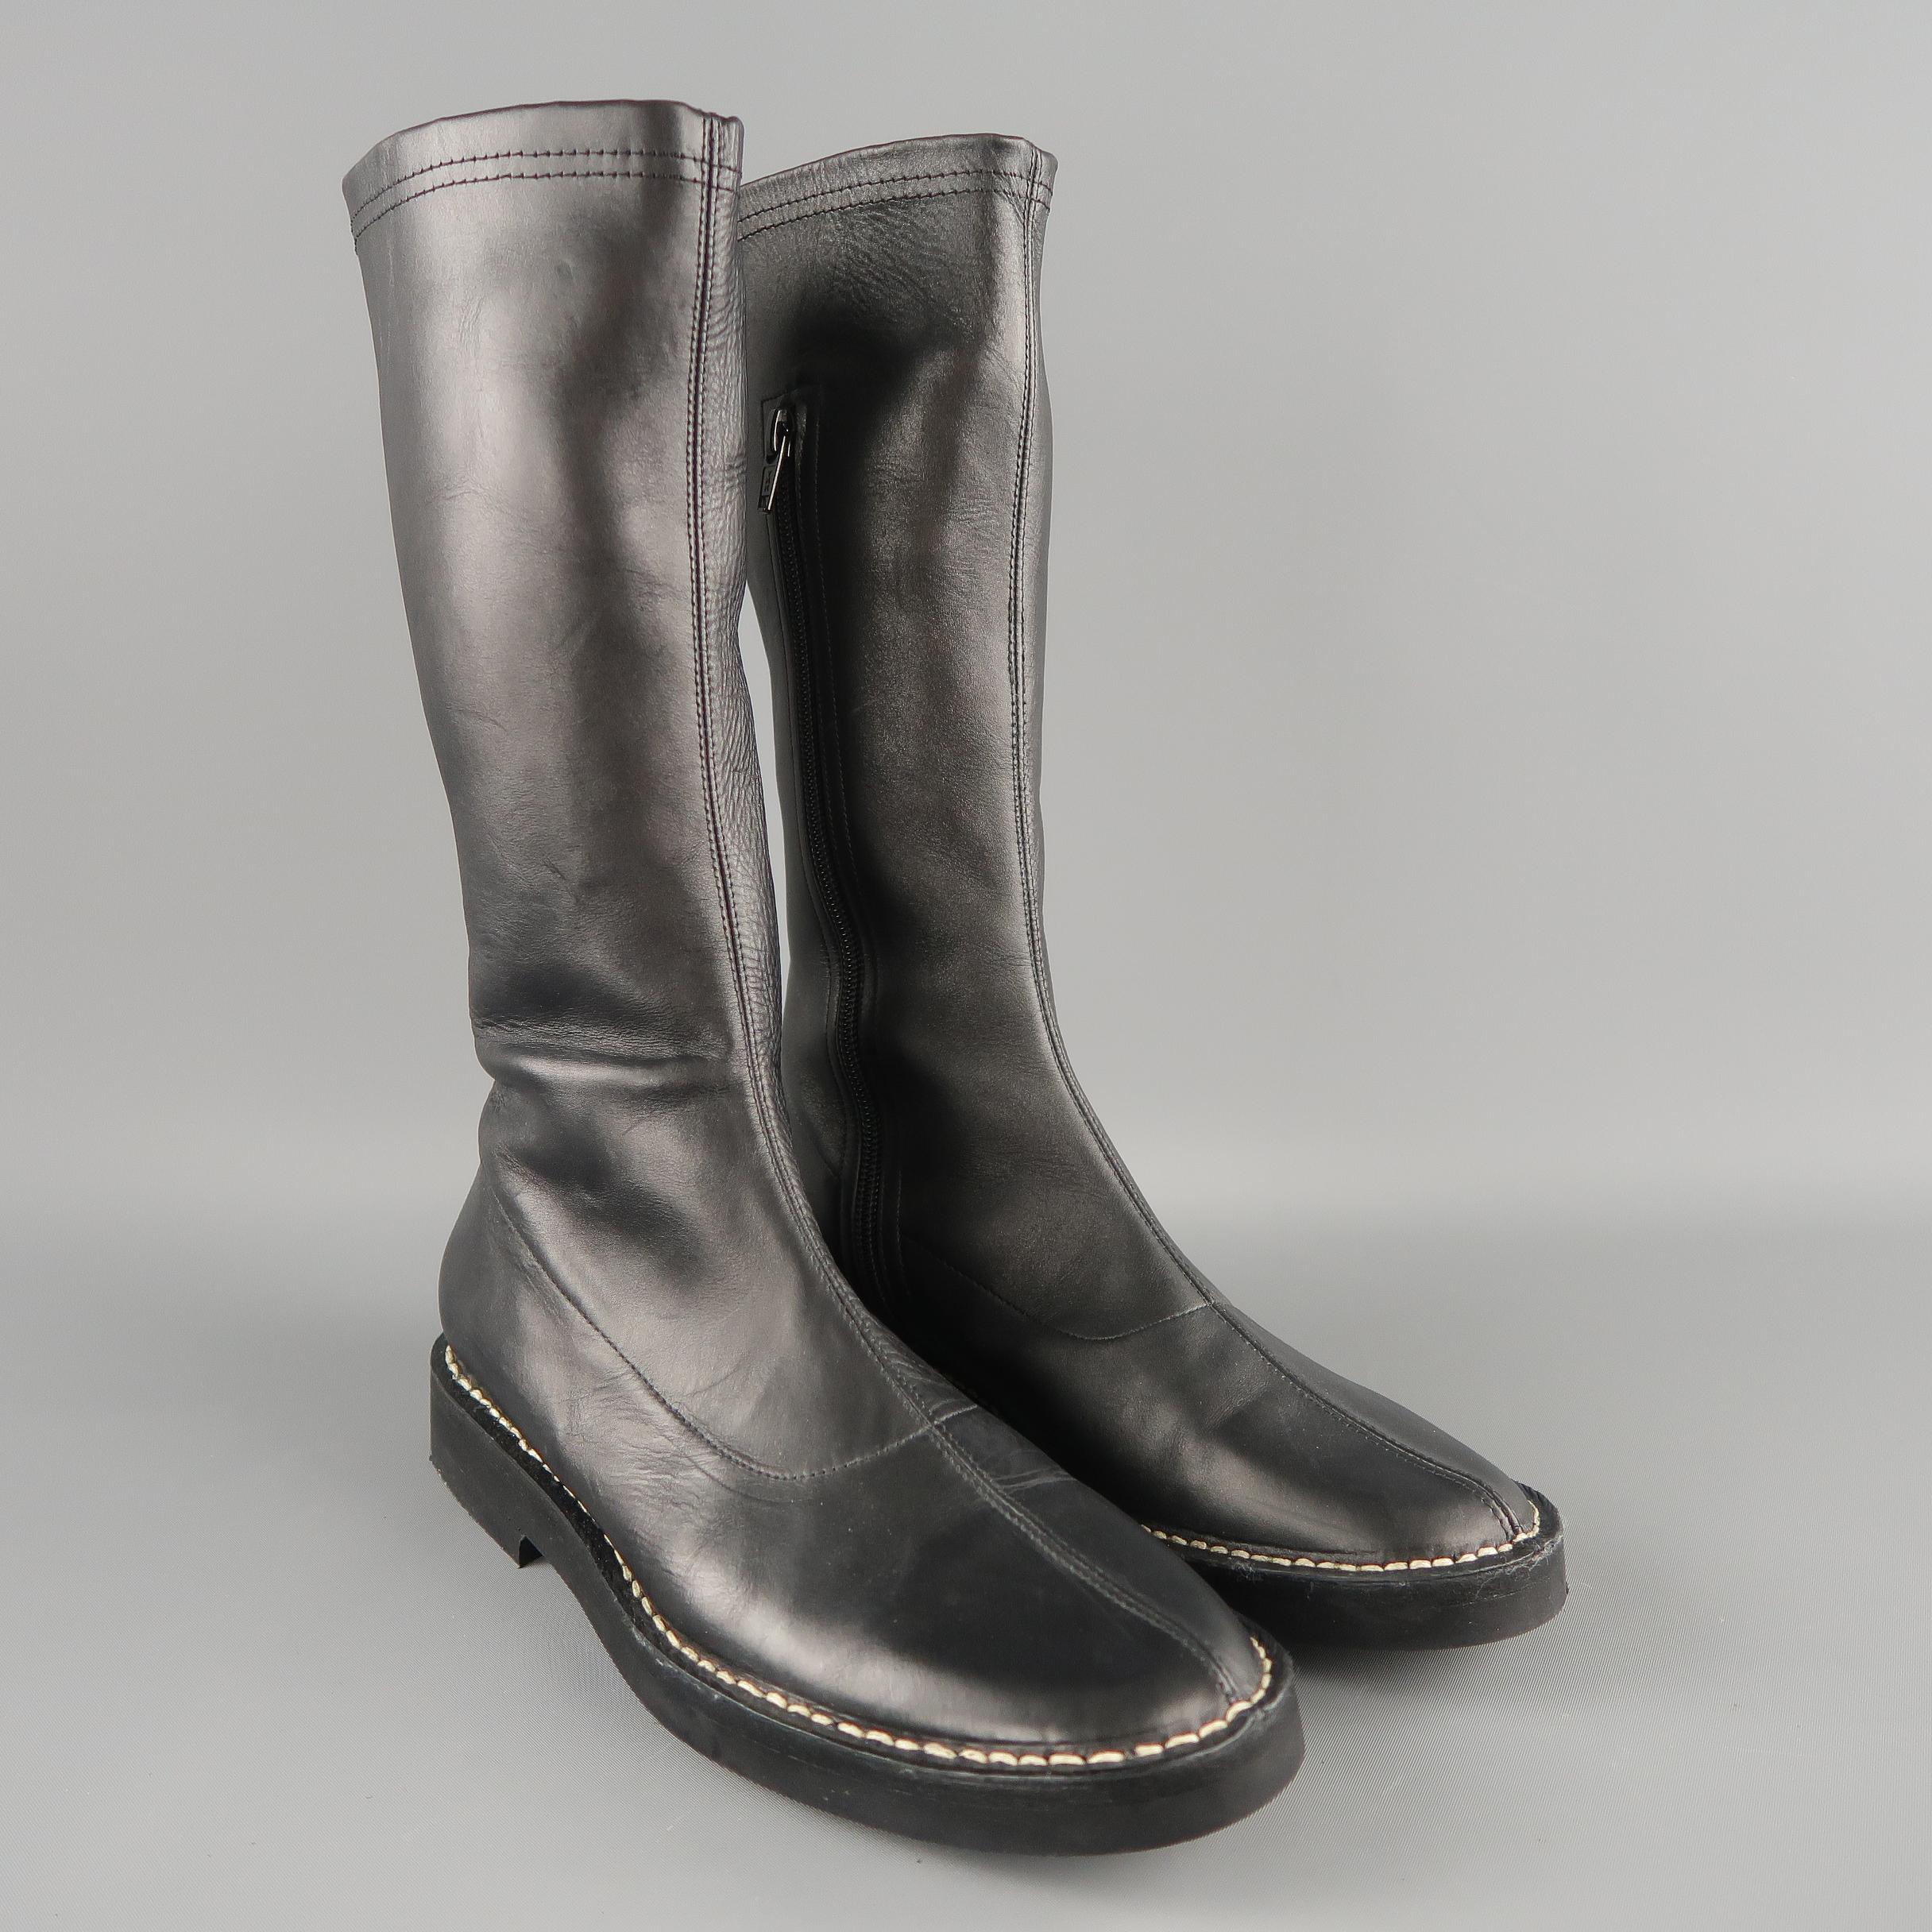 ANN DEMEULEMEESTER boots come in smooth leather with a thick contrast stitch sole and calf high shaft with inner zip. Made in Italy.
 
New without Tags.
Marked: IT 36.5
 
Measurements:
 
Length: 10.75 in.
Width: 4 in.
Height: 11.5 in.